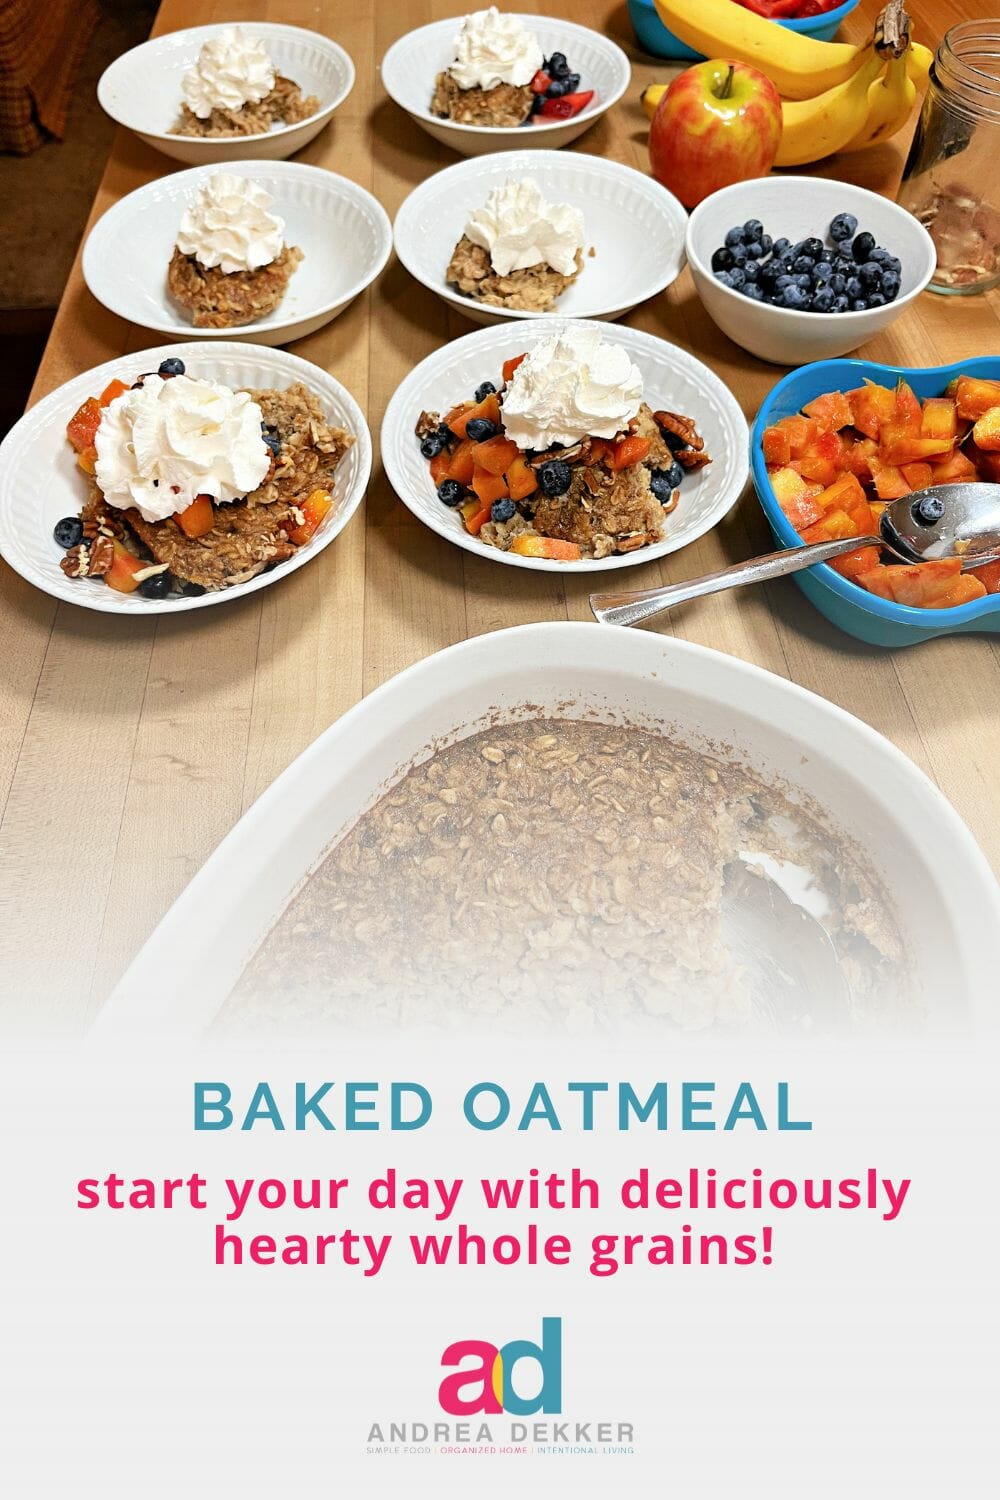 Get out of your breakfast rut and add more whole grains to your morning meal with this simple, make-ahead recipe for Baked Oatmeal! via @andreadekker